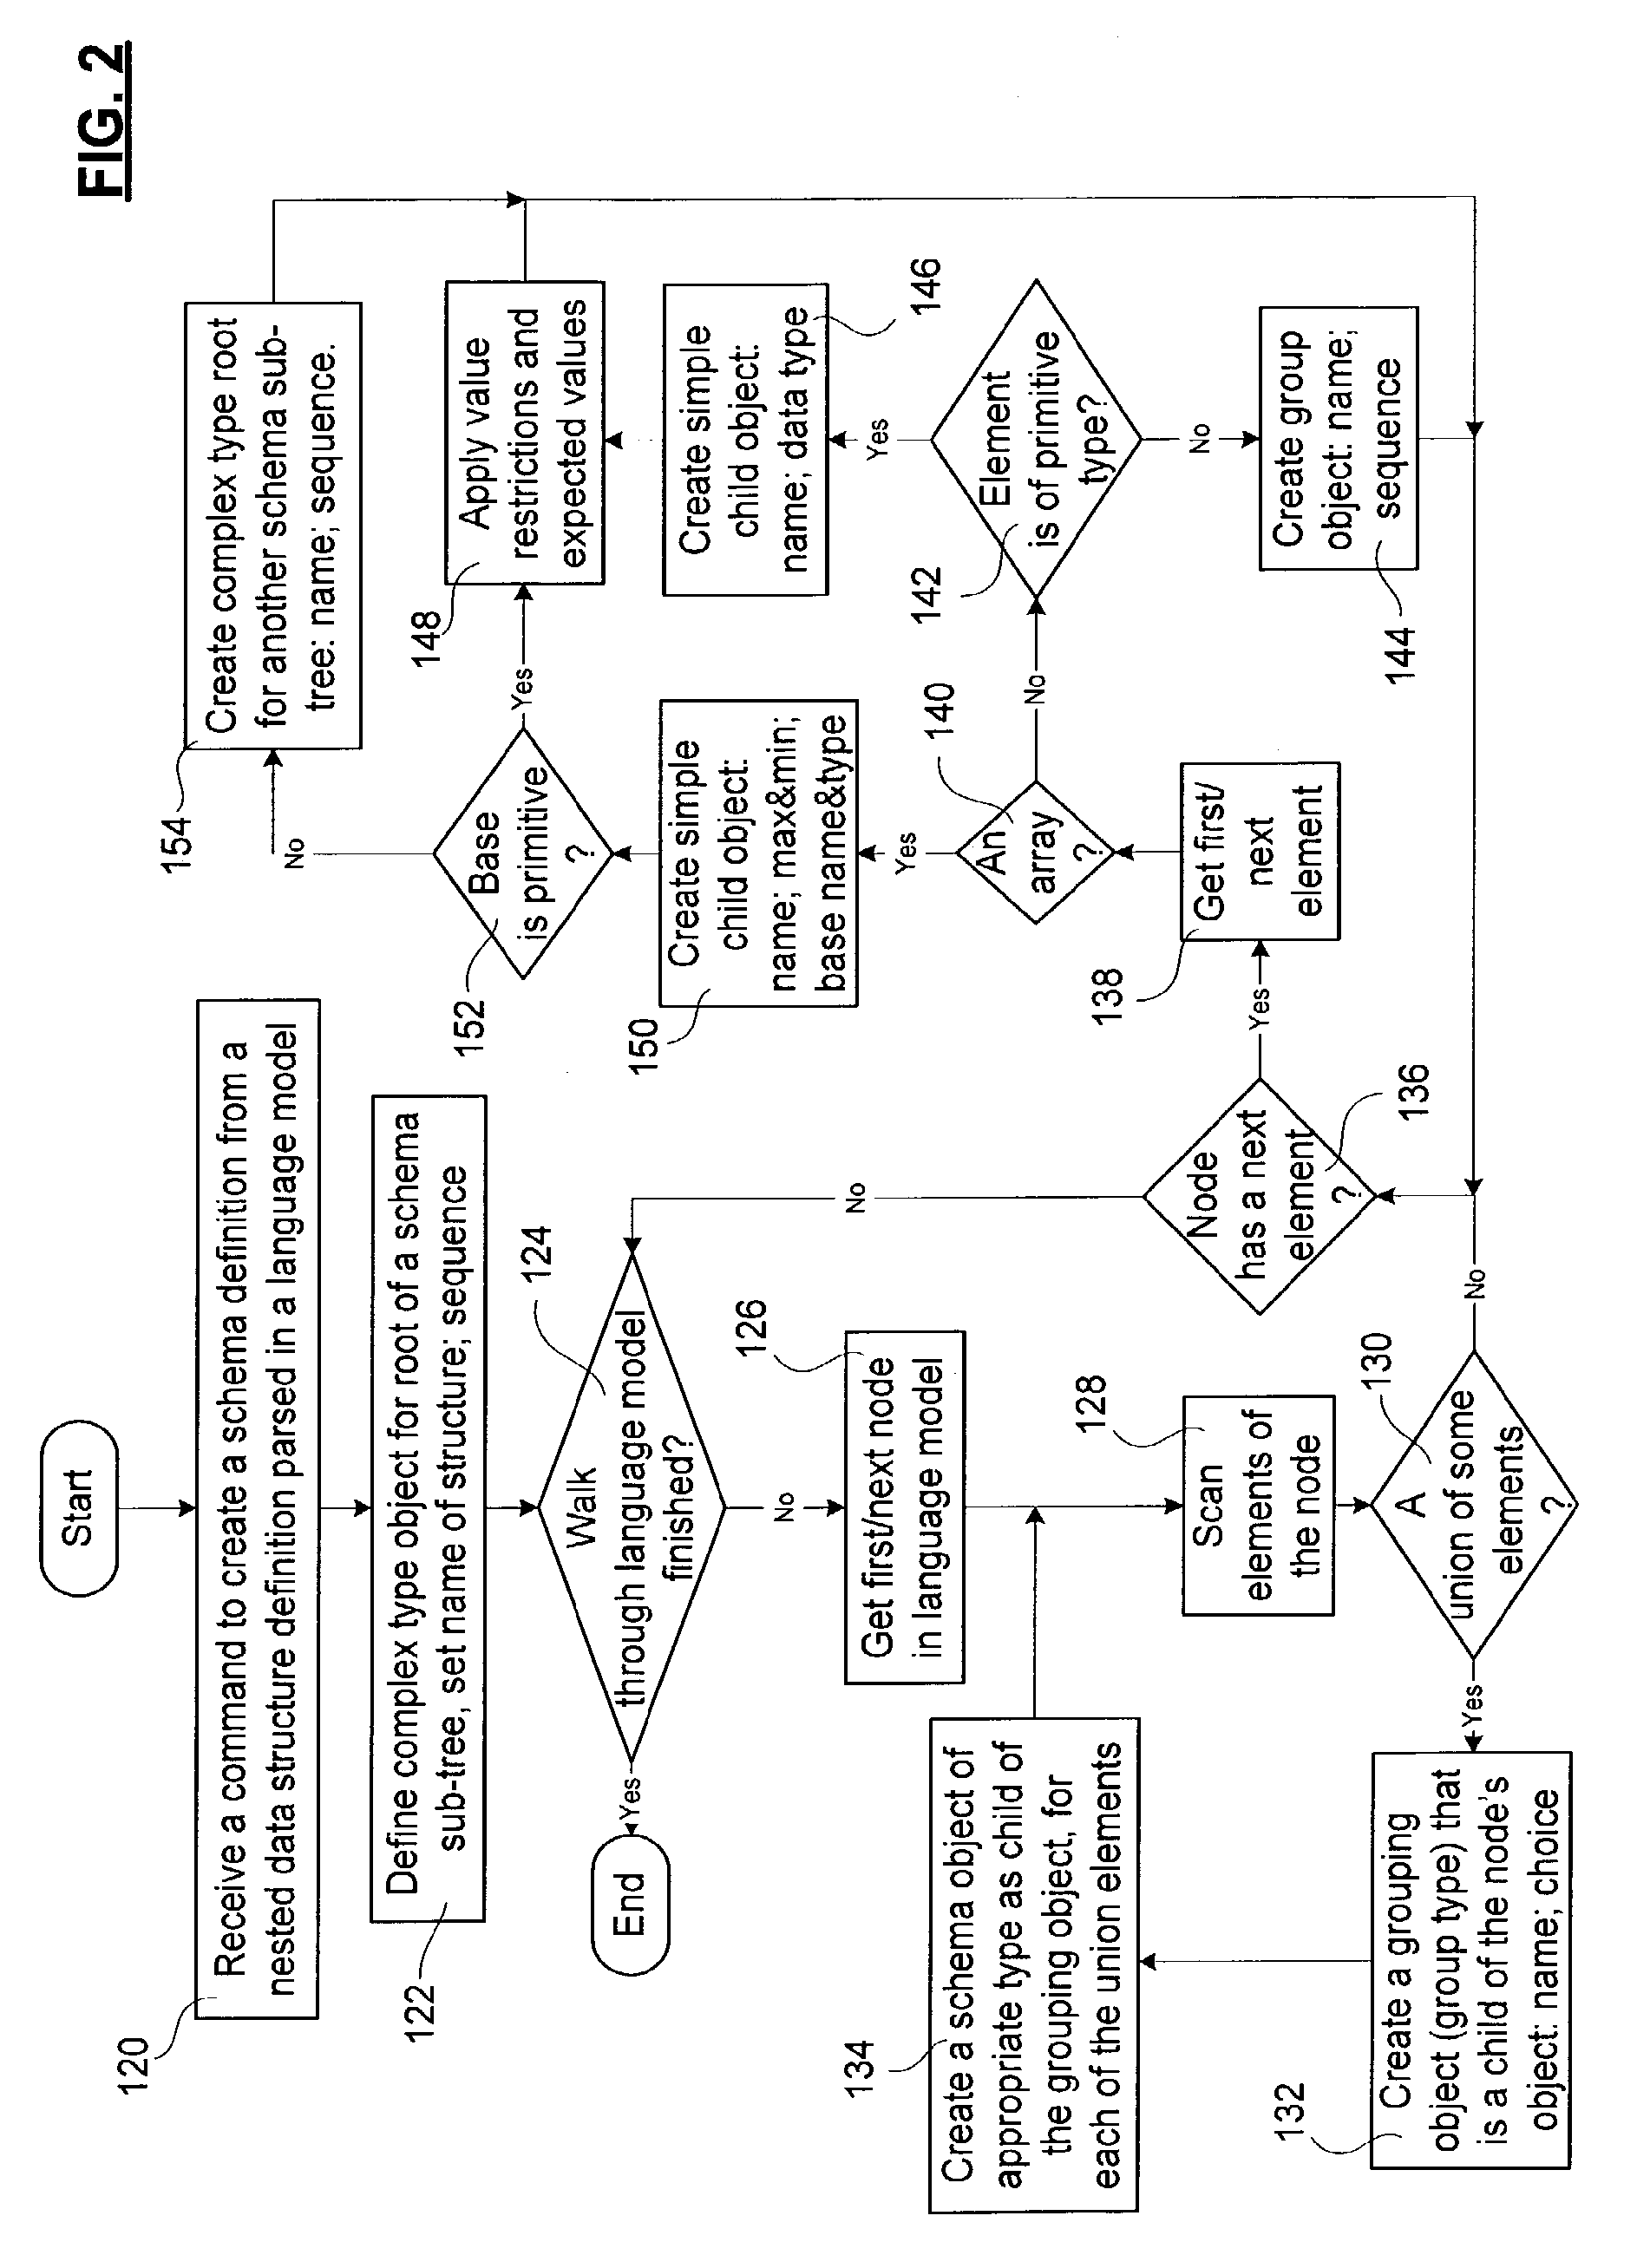 Method and Apparatus for Converting Legacy Programming Language Data Structures to Schema Definitions